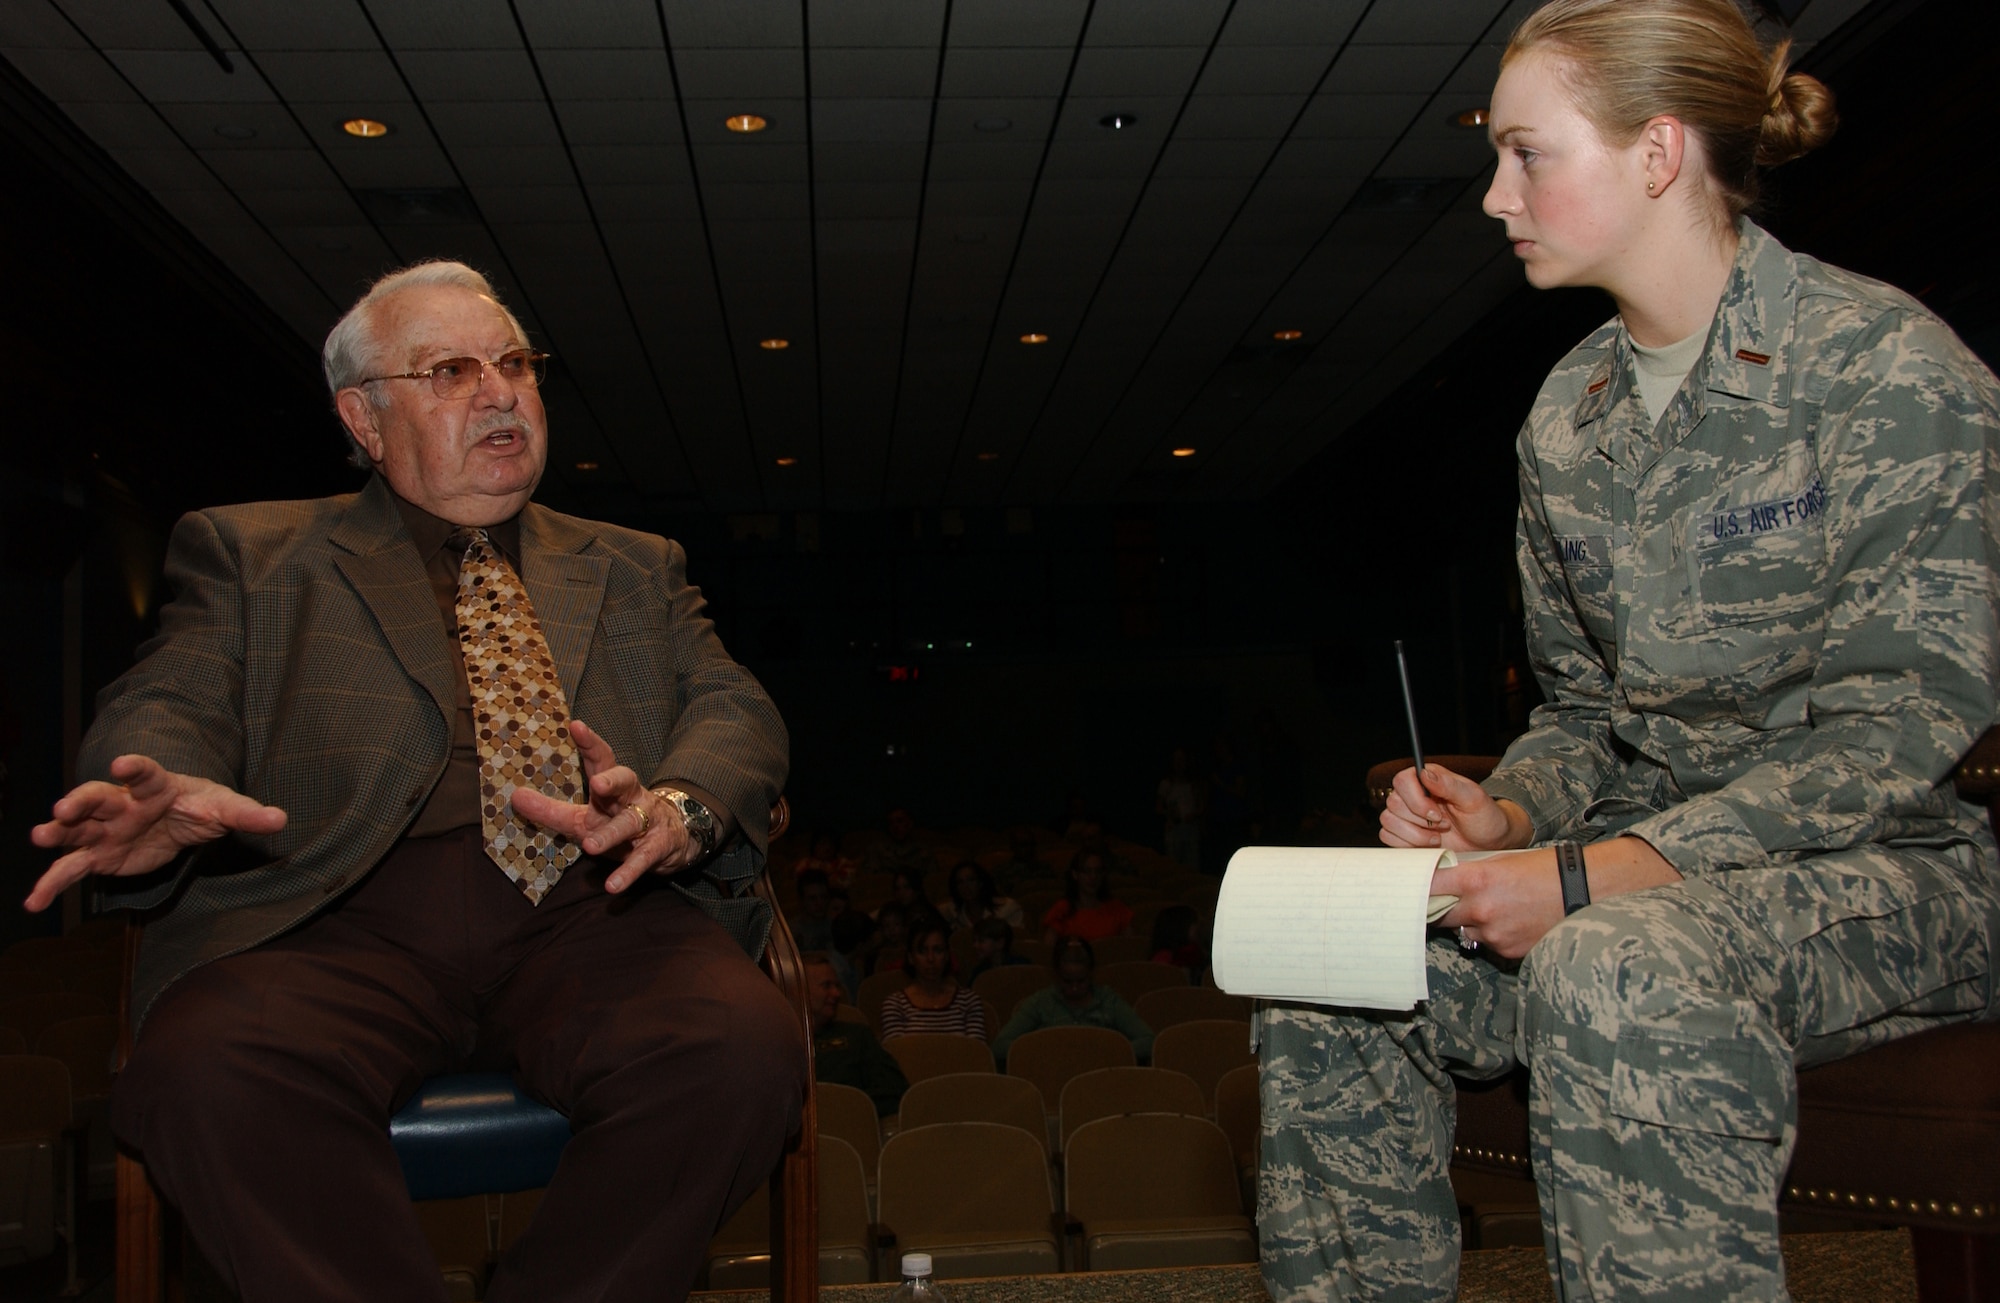 2nd Lt. Katherine Roling, 71st Flying Training Wing Public Affairs, interviews Holocaust survivor Jack Mandelbaum April 21 prior to him speaking about his experiences in labor and concentration camps run by the Nazis. About 200 Vance Airmen and their families attended the event at the base auditorium, honoring Holocaust Remembrance Day. (U.S. Air Force photo by Staff Sgt. Brian Hill)                               